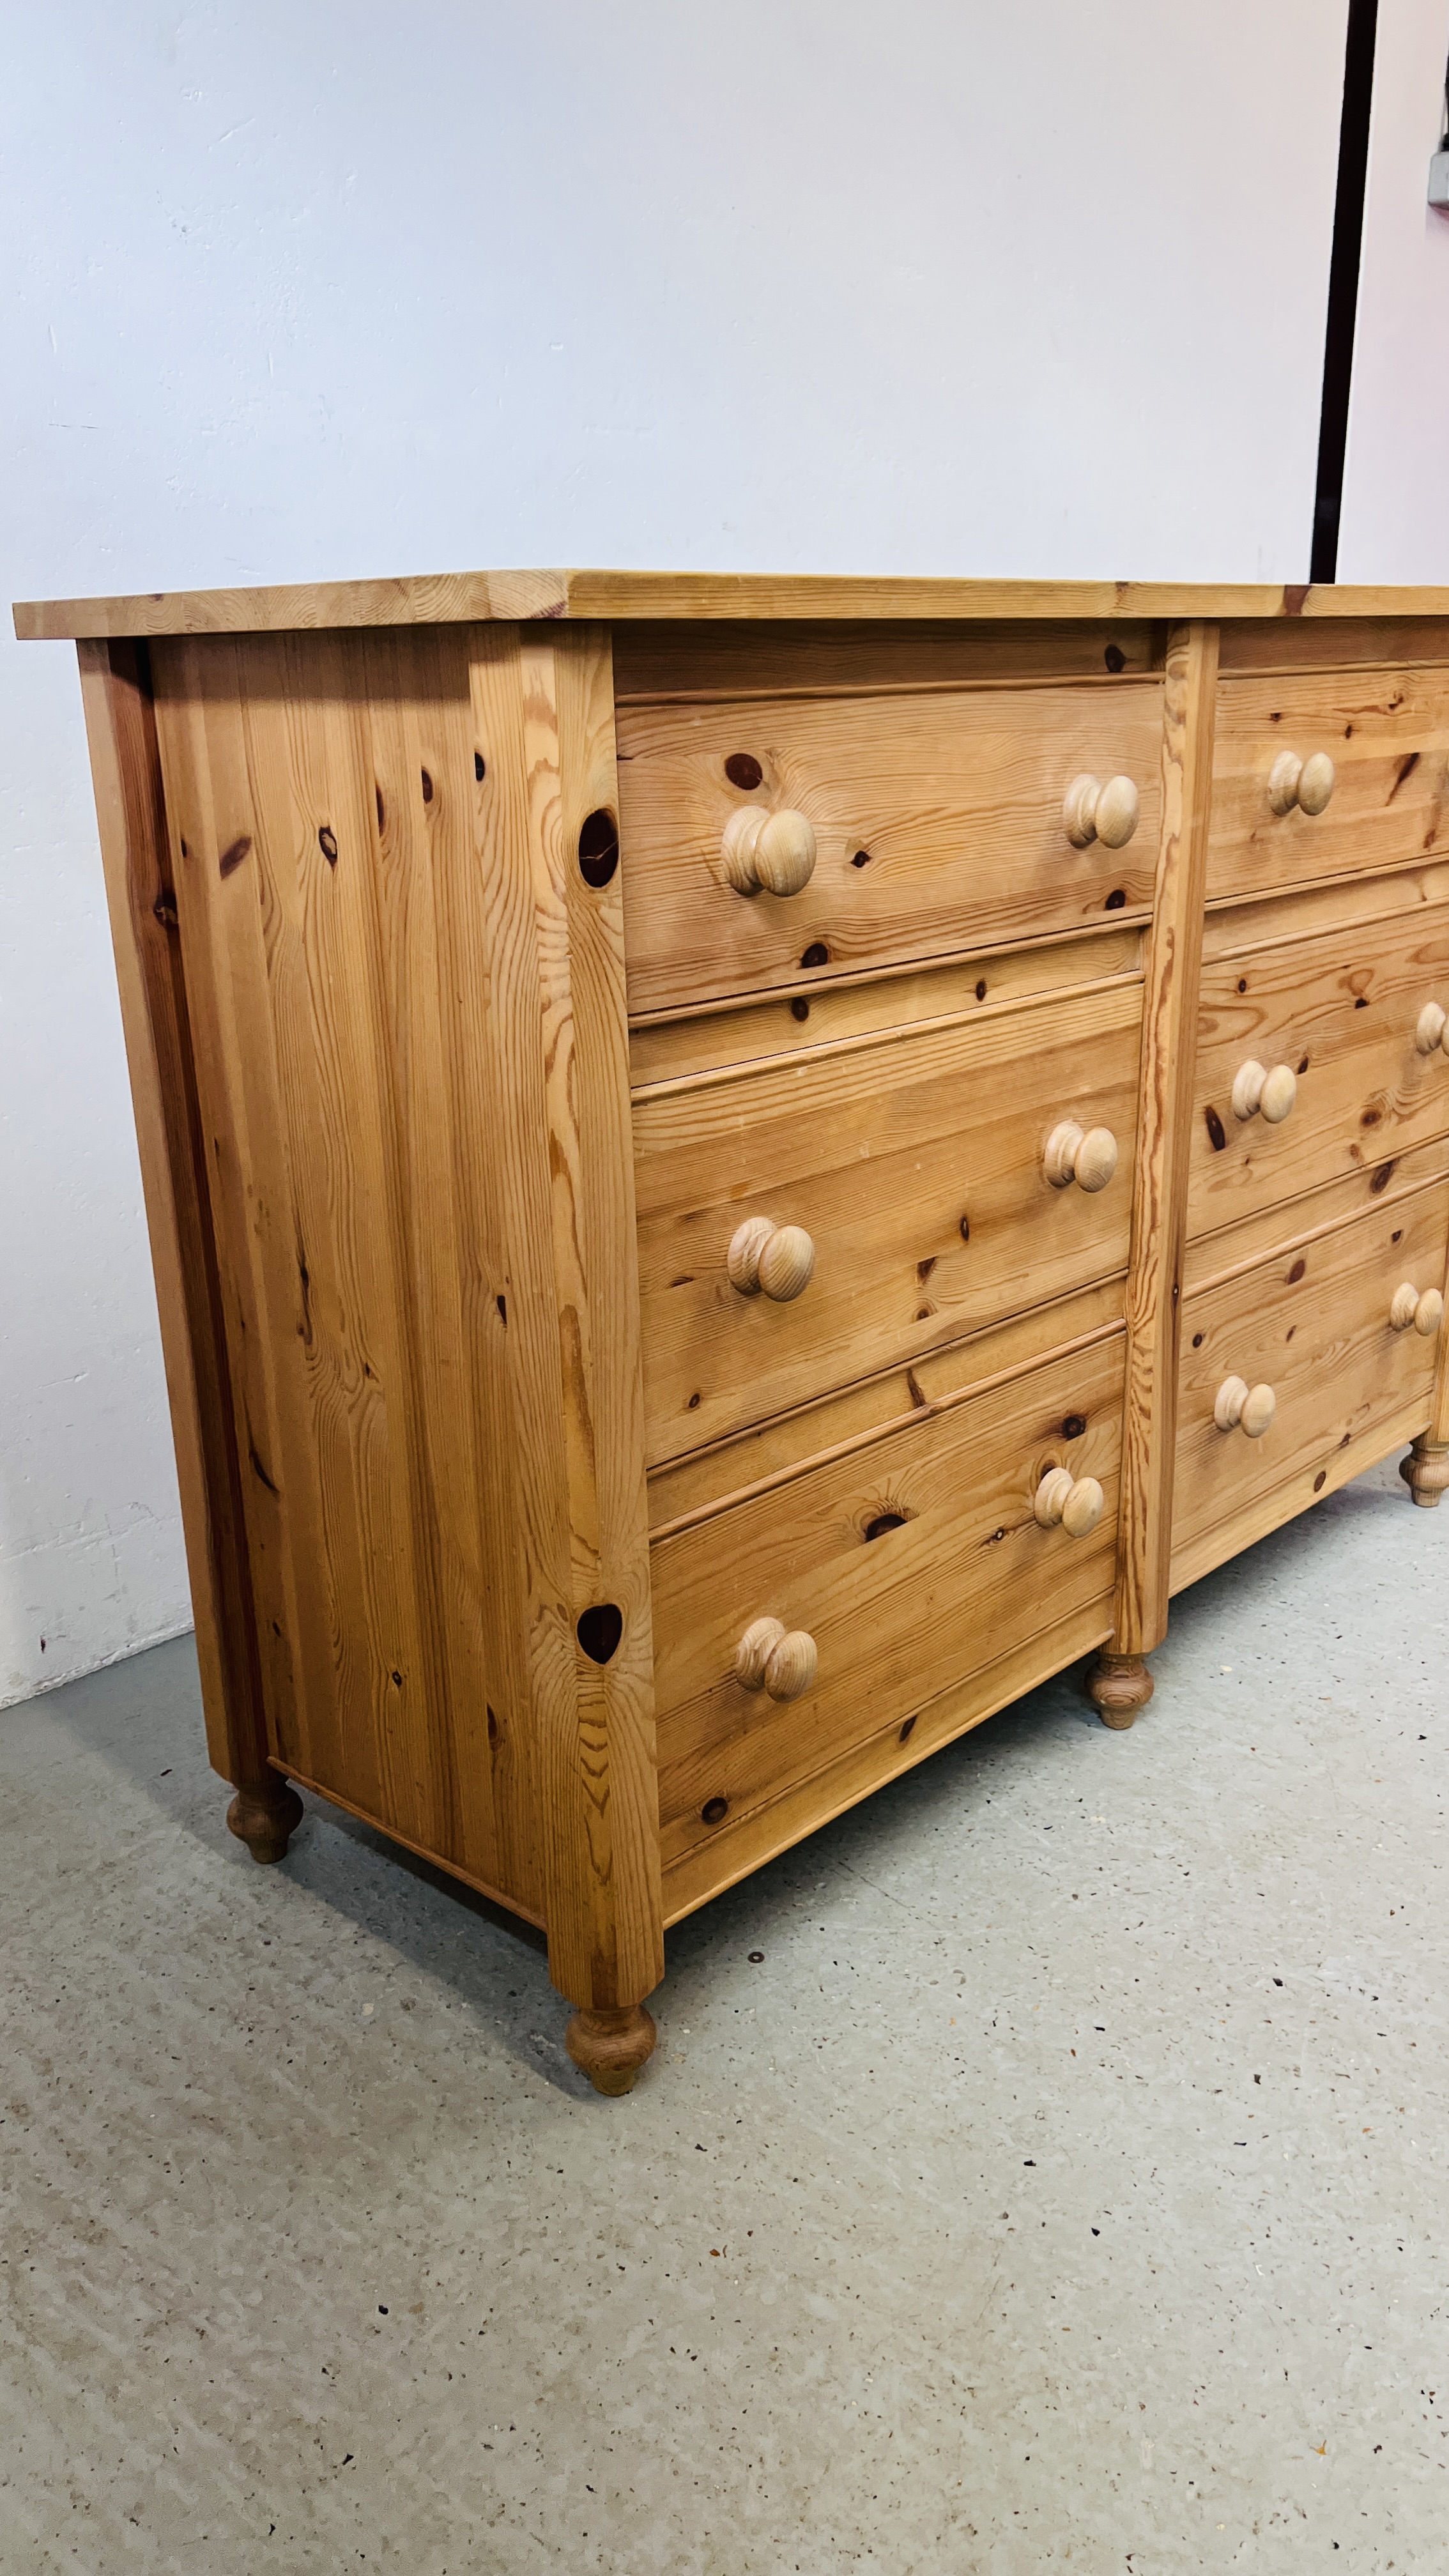 A LARGE SOLID PINE SIX DRAWER CHEST WITH TURNED KNOBS 144CM X 54CM X 101CM. - Image 5 of 6